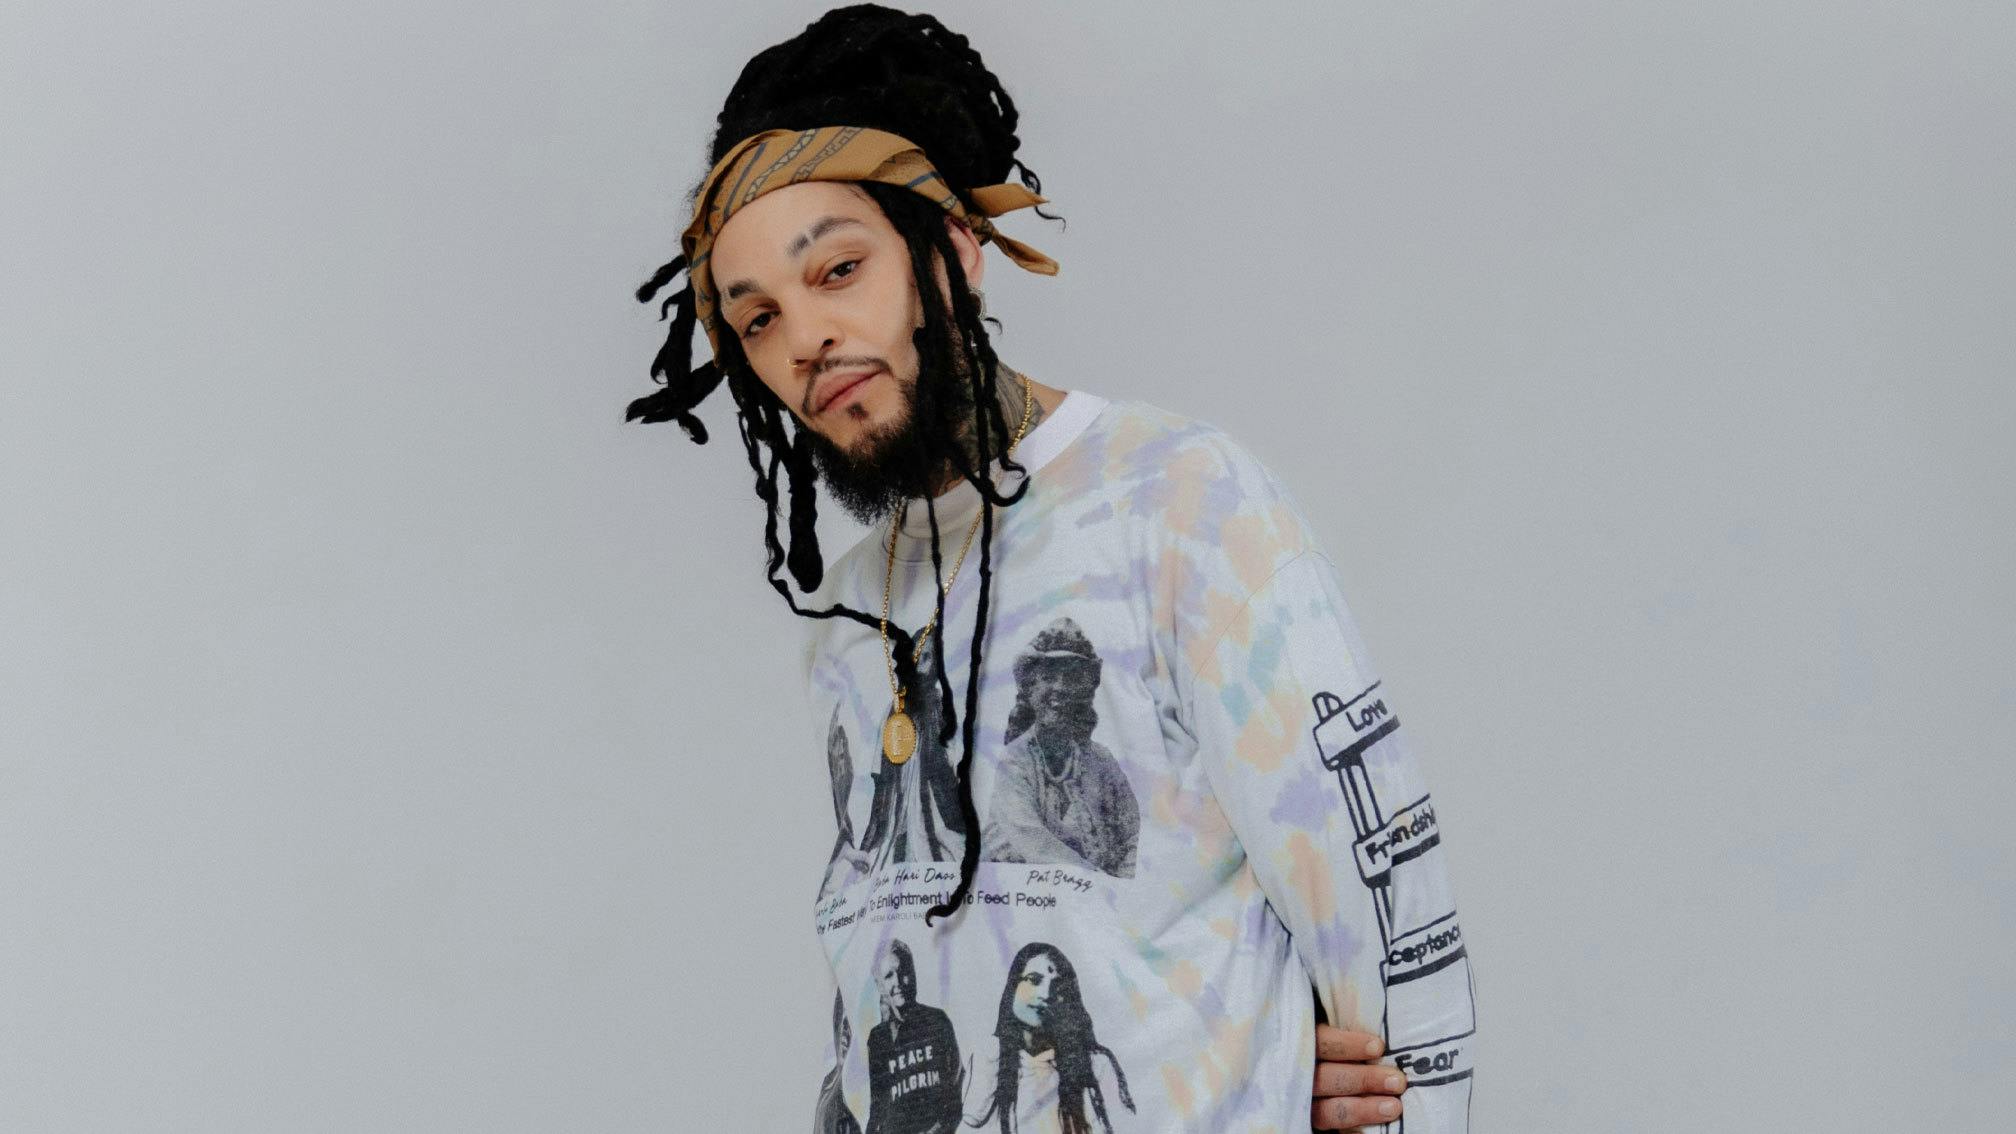 Travie McCoy teams up with Elohim for new single The Bridge